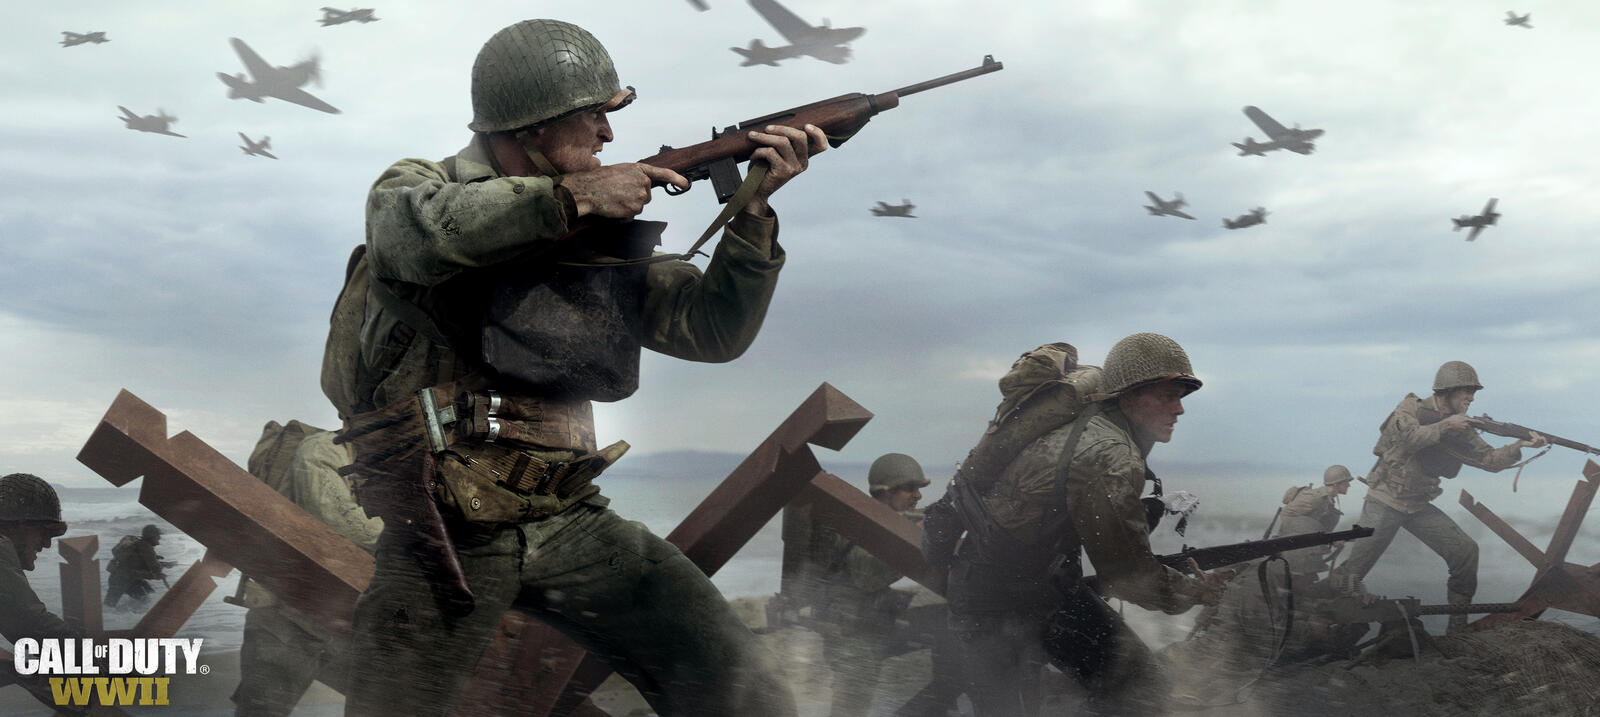 Wallpapers Call Of Duty Wwii Call Of Duty Ww2 call of duty on the desktop